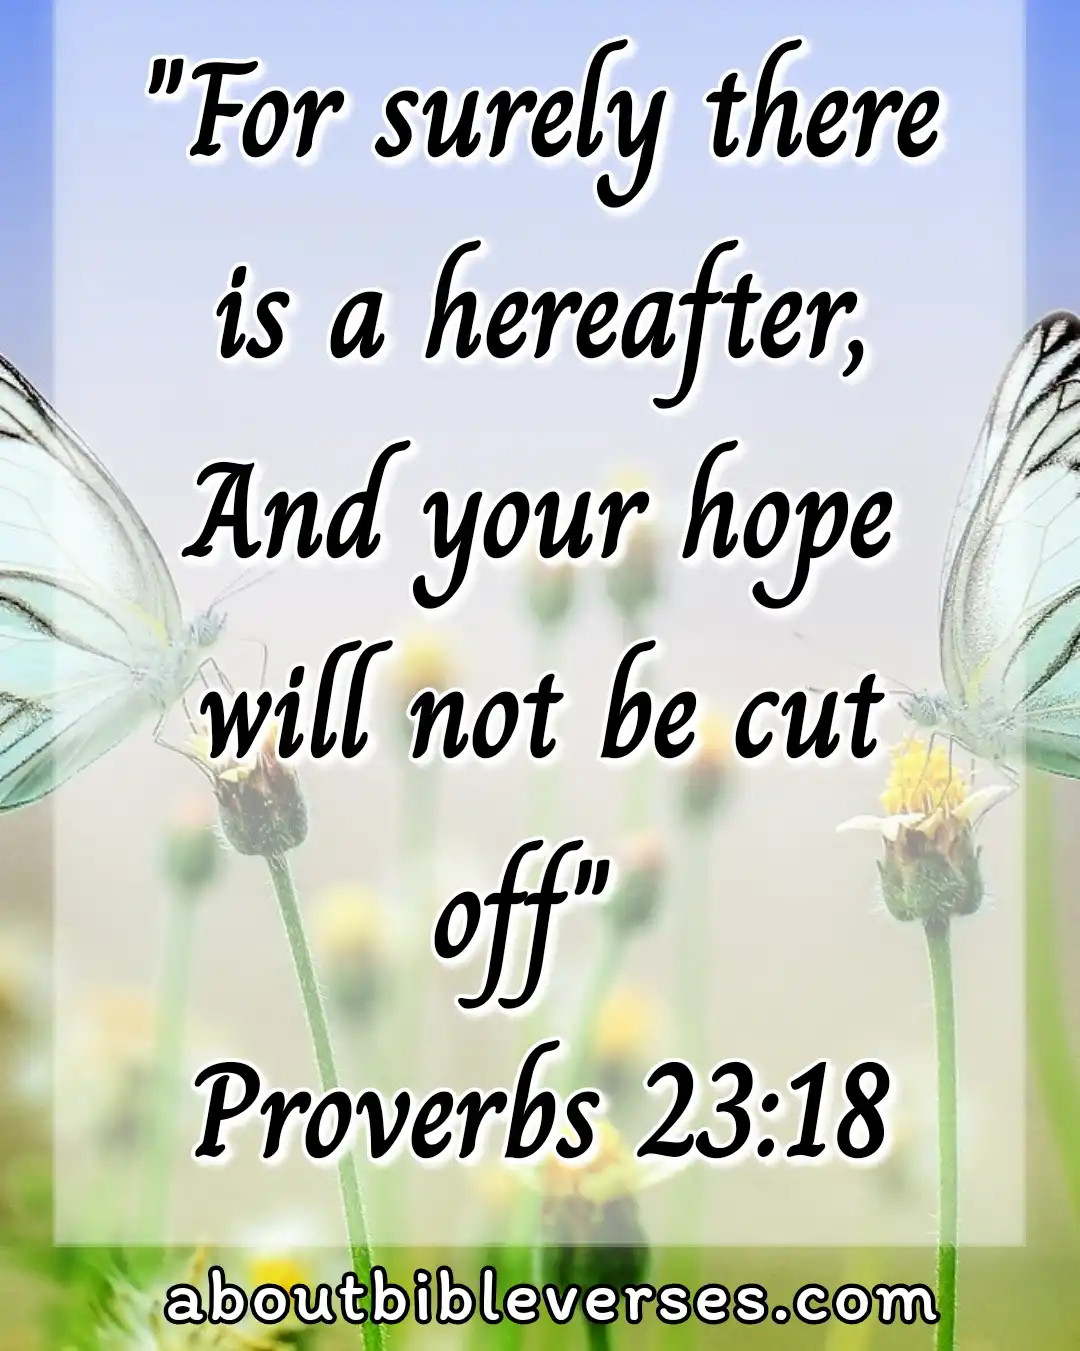 Bible verse about hope for the future (Proverbs 23:18)